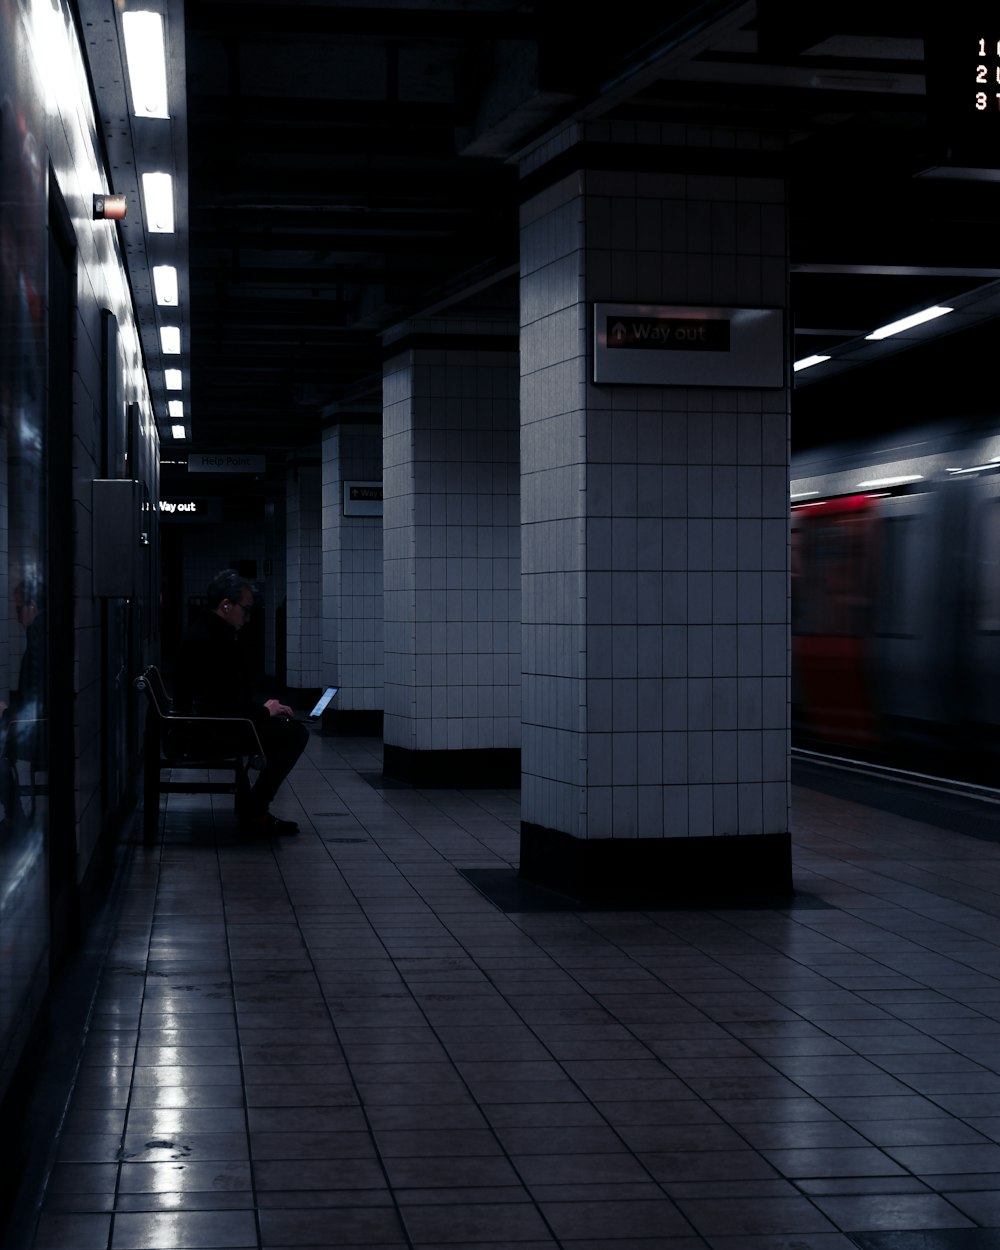 a man sitting on a bench in a subway station